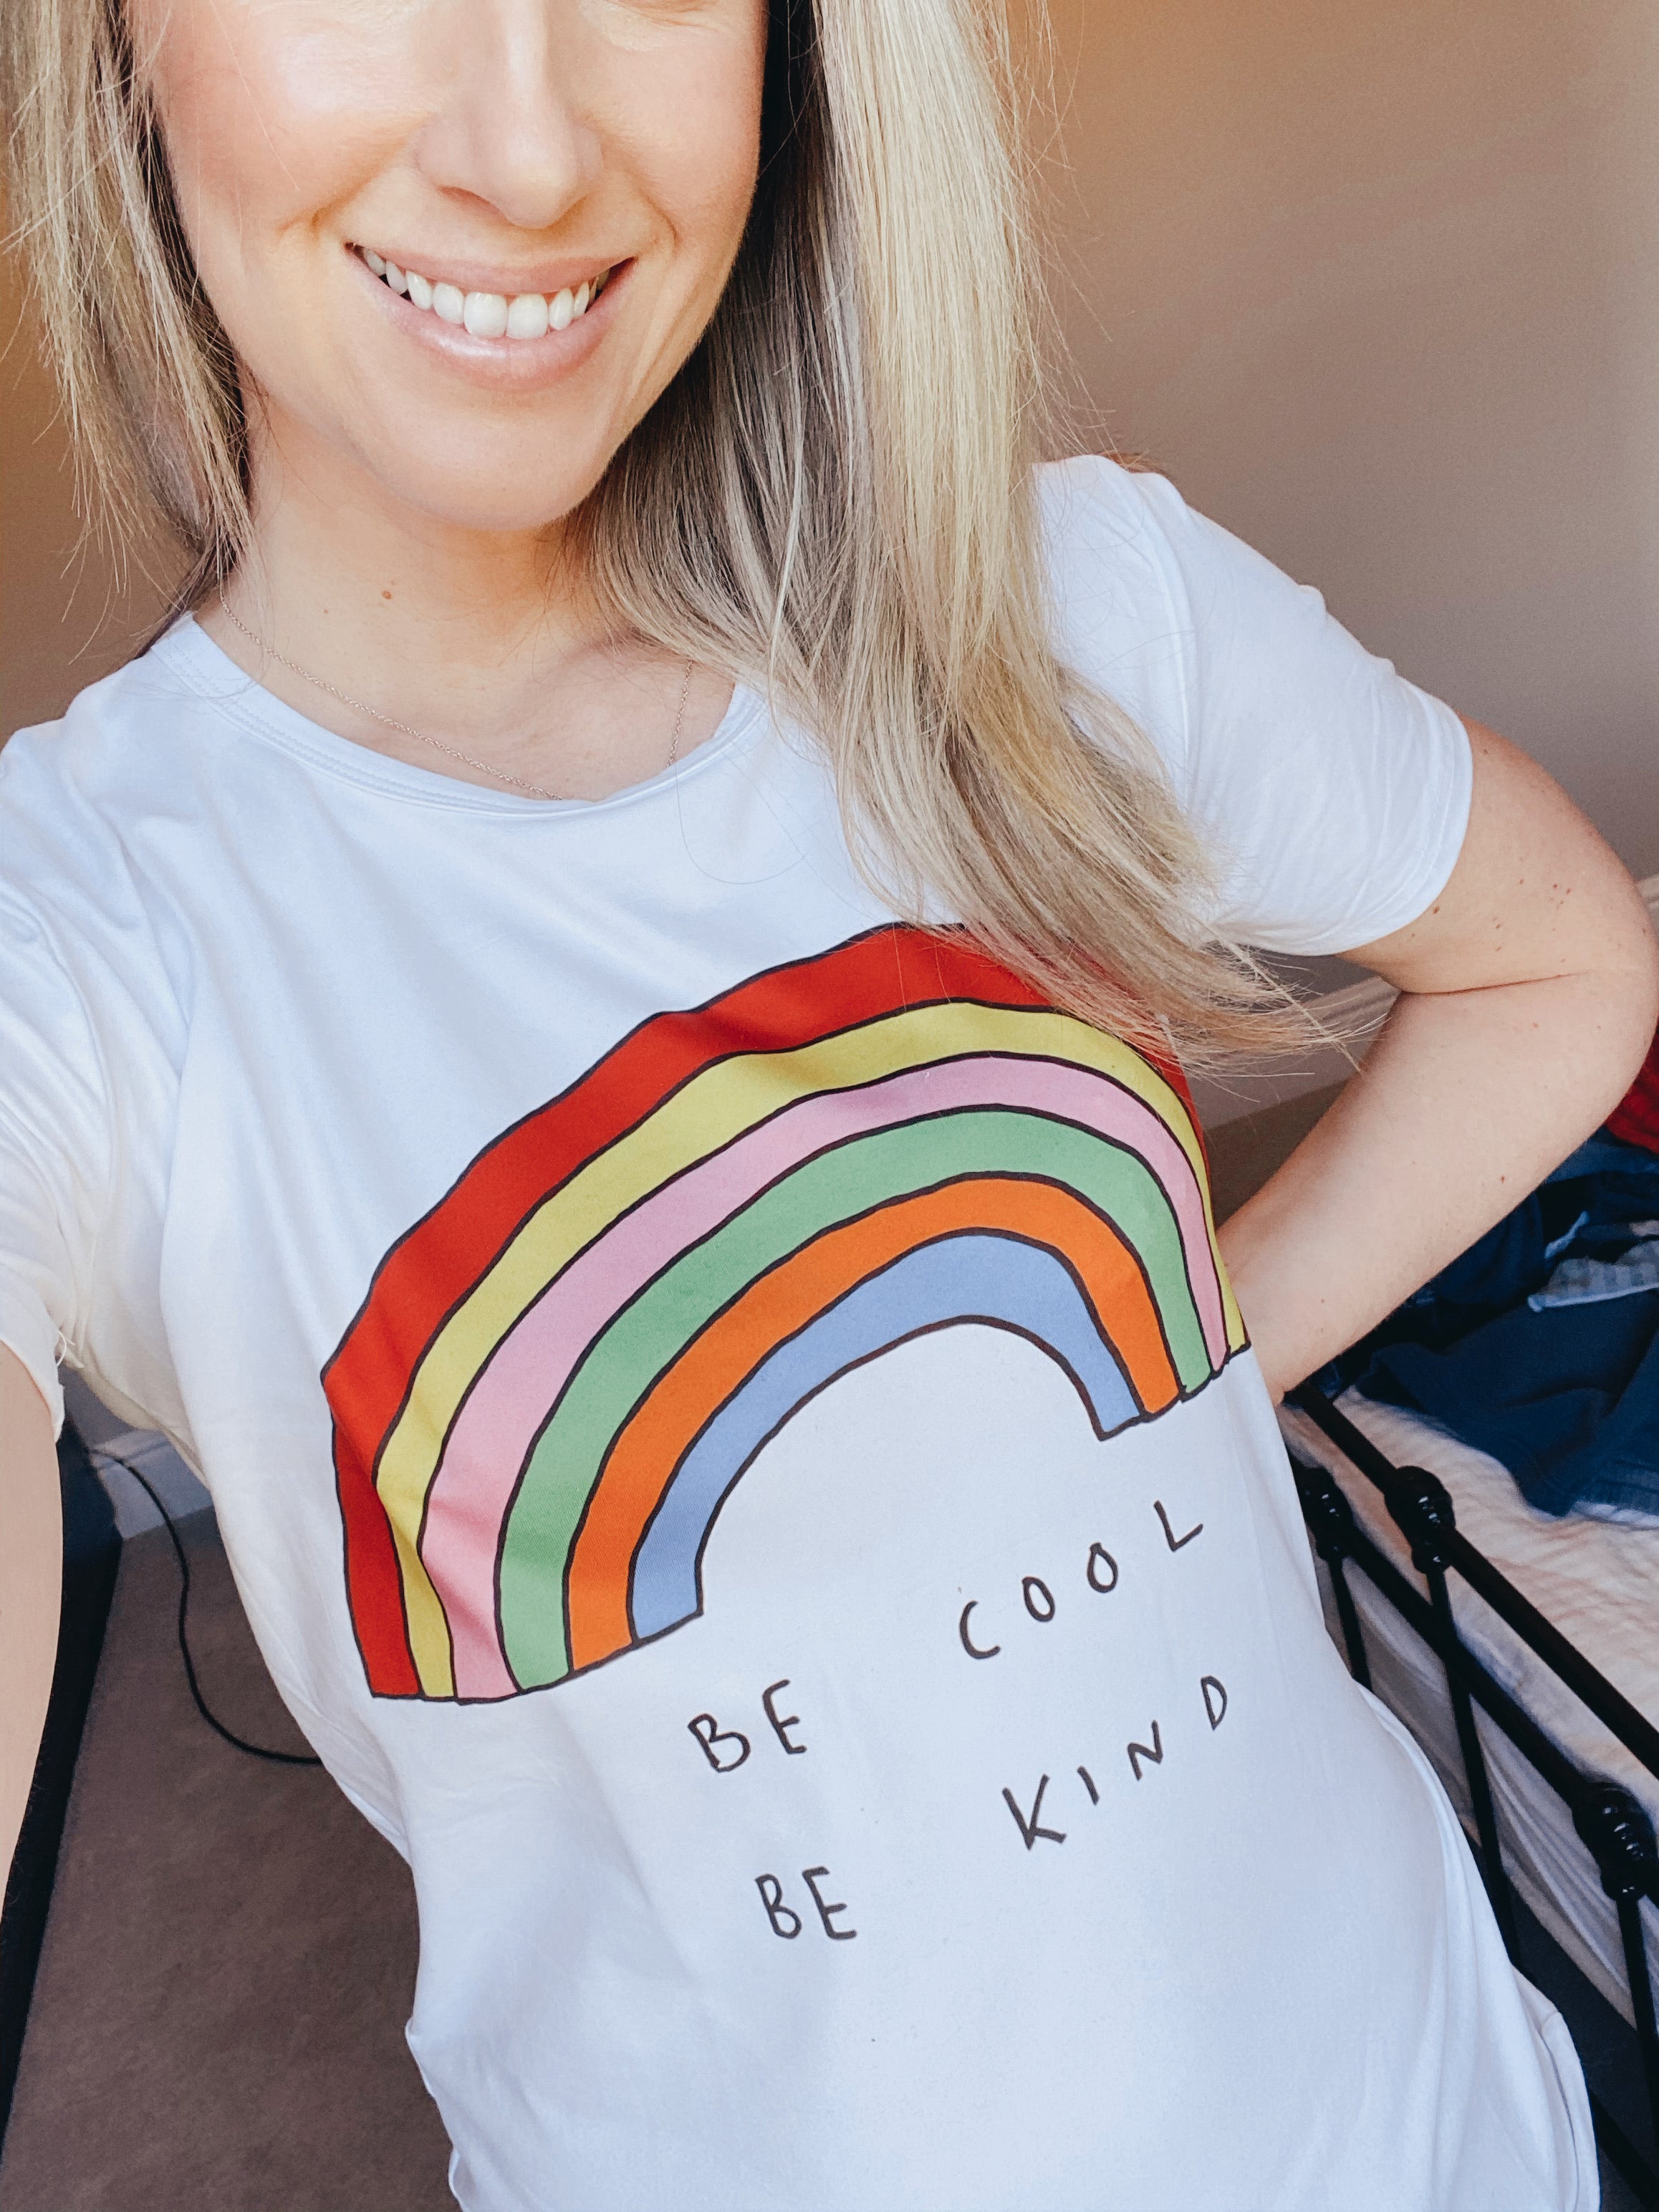 Riley - Be Cool, Be Kind Rainbow T-shirt